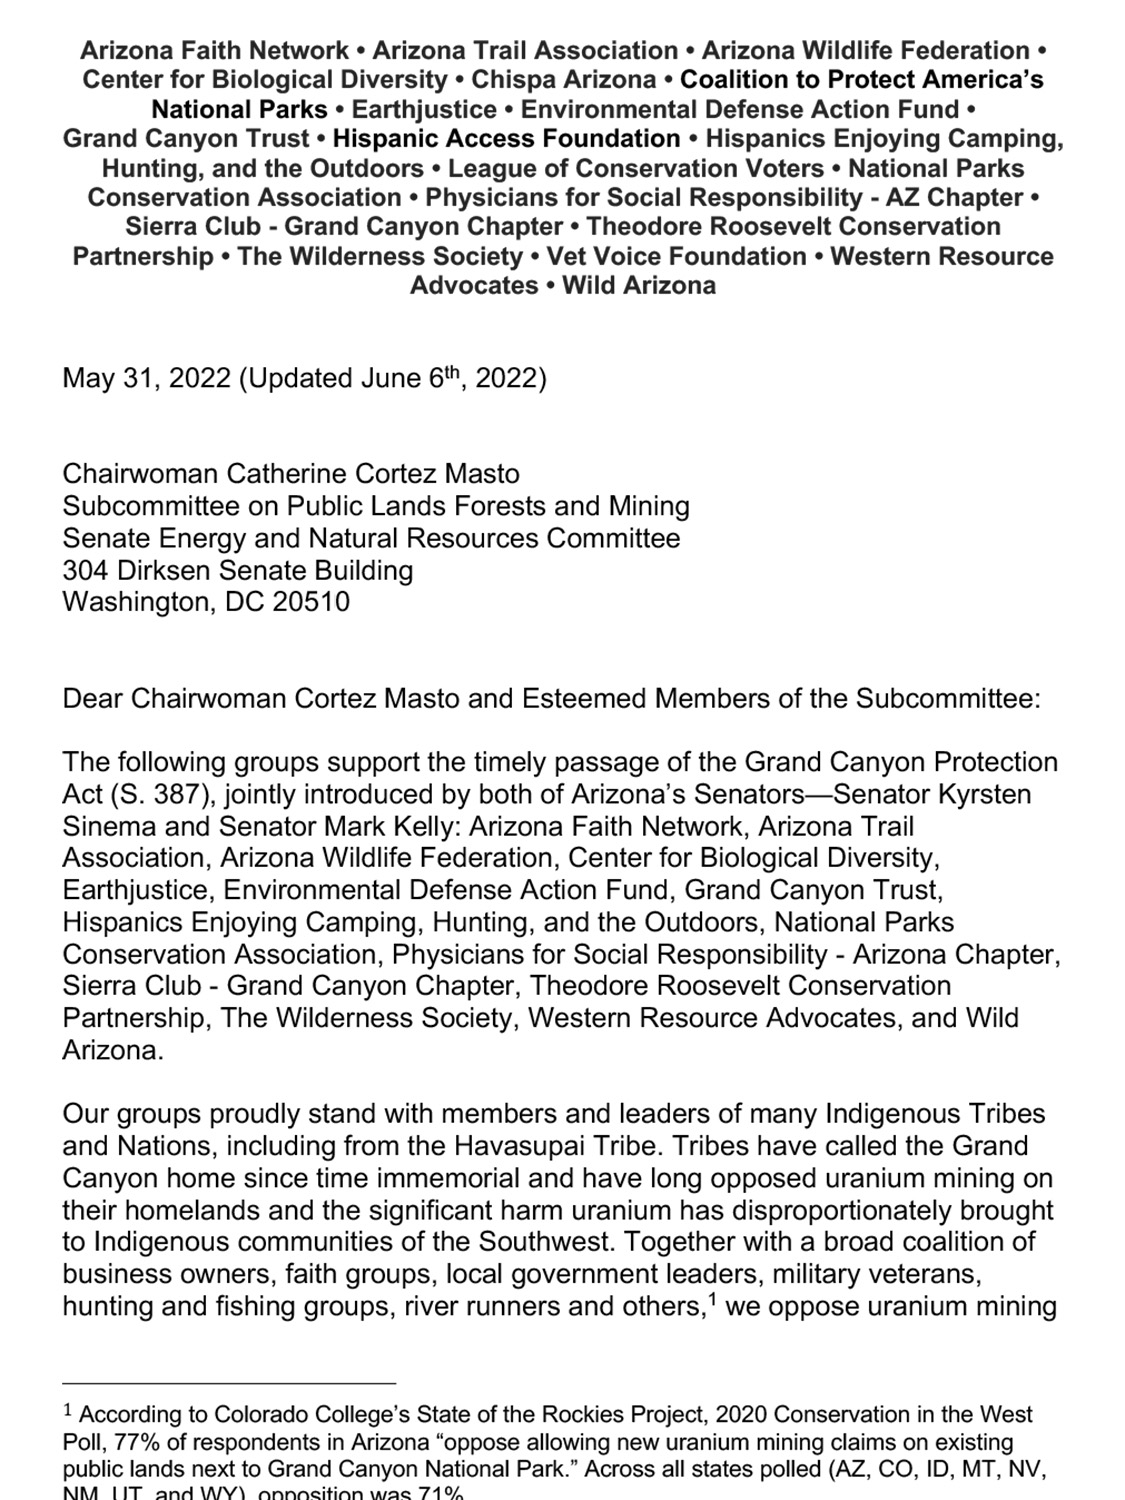 Coalition letter of support for the Grand Canyon Protection Act